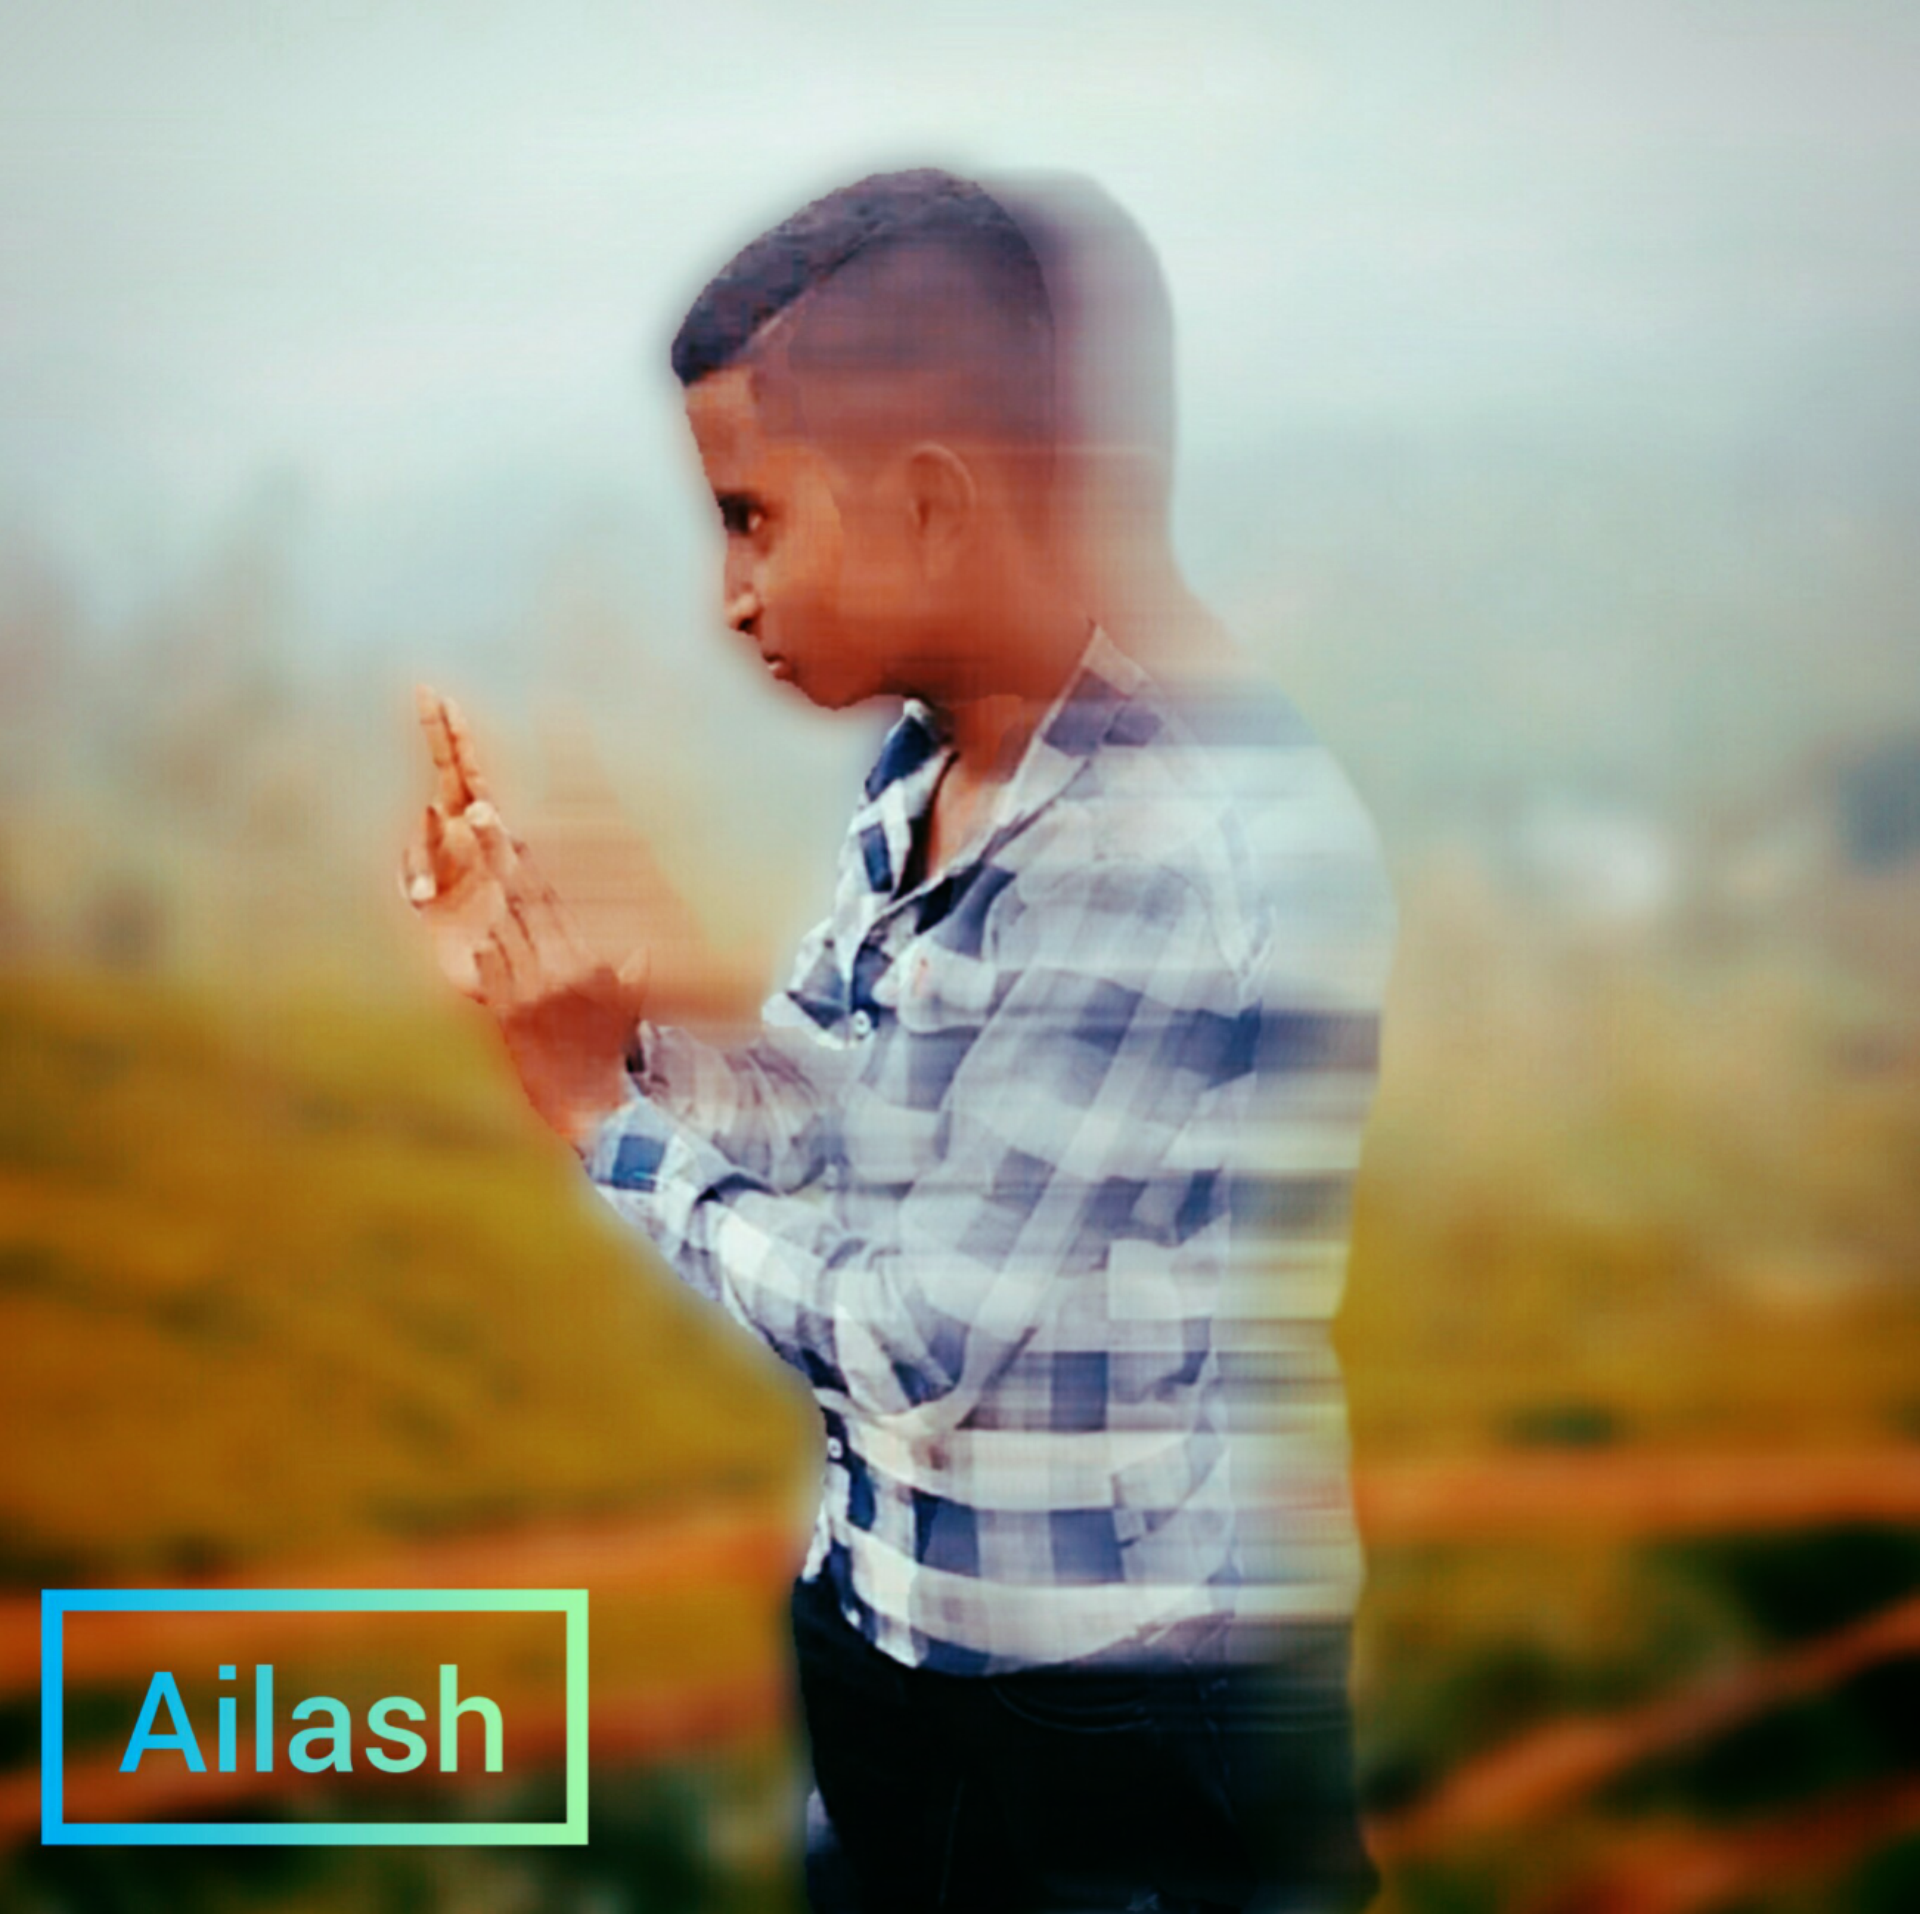 AILASH THE BEST